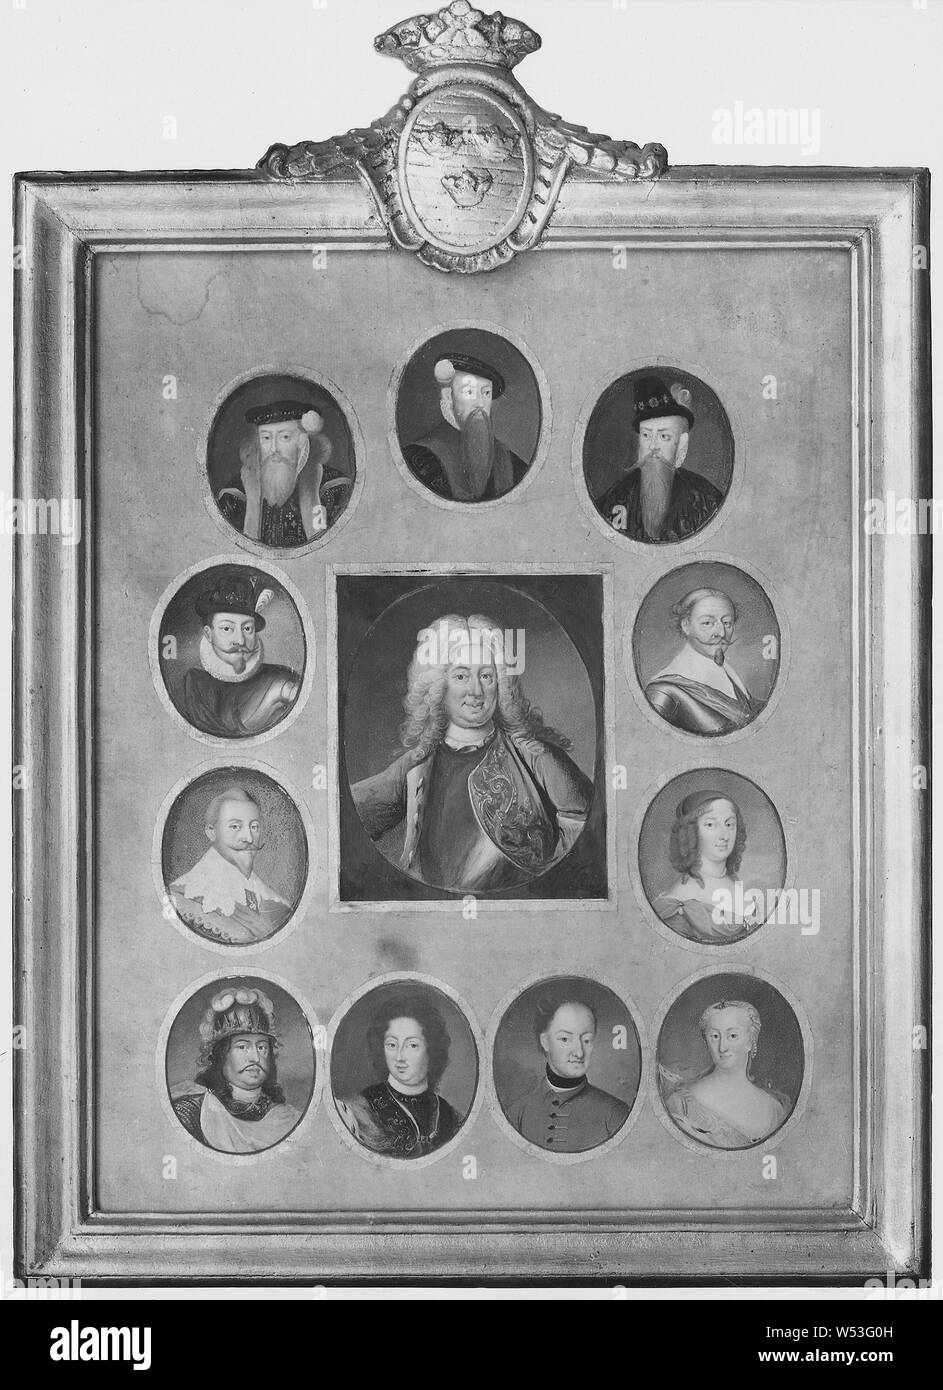 Attributed to Niclas Lafrensen d.ä, Kung Fredrik I, Queen Ulrika Eleonora dy, King Karl XI, King Karl XII, King Karl X Gustav, King Gustav I, King Karl IX, King Johan III, King Sigismund, King Erik XIV, King, Gustav II Adolf and Queen Kristina, Swedish governors from Gustav I to Fredrik I, 12 people, painting, Frederick I of Sweden, Watercolor and gouache on parchment, Height, 48.5 cm (19 inches), Width, 35 cm (13.7 inches), Inscription, Grh 462 REGENTLÄDD GUSTAF I-FREDRIK I By N. Lafrensen d. Stock Photo